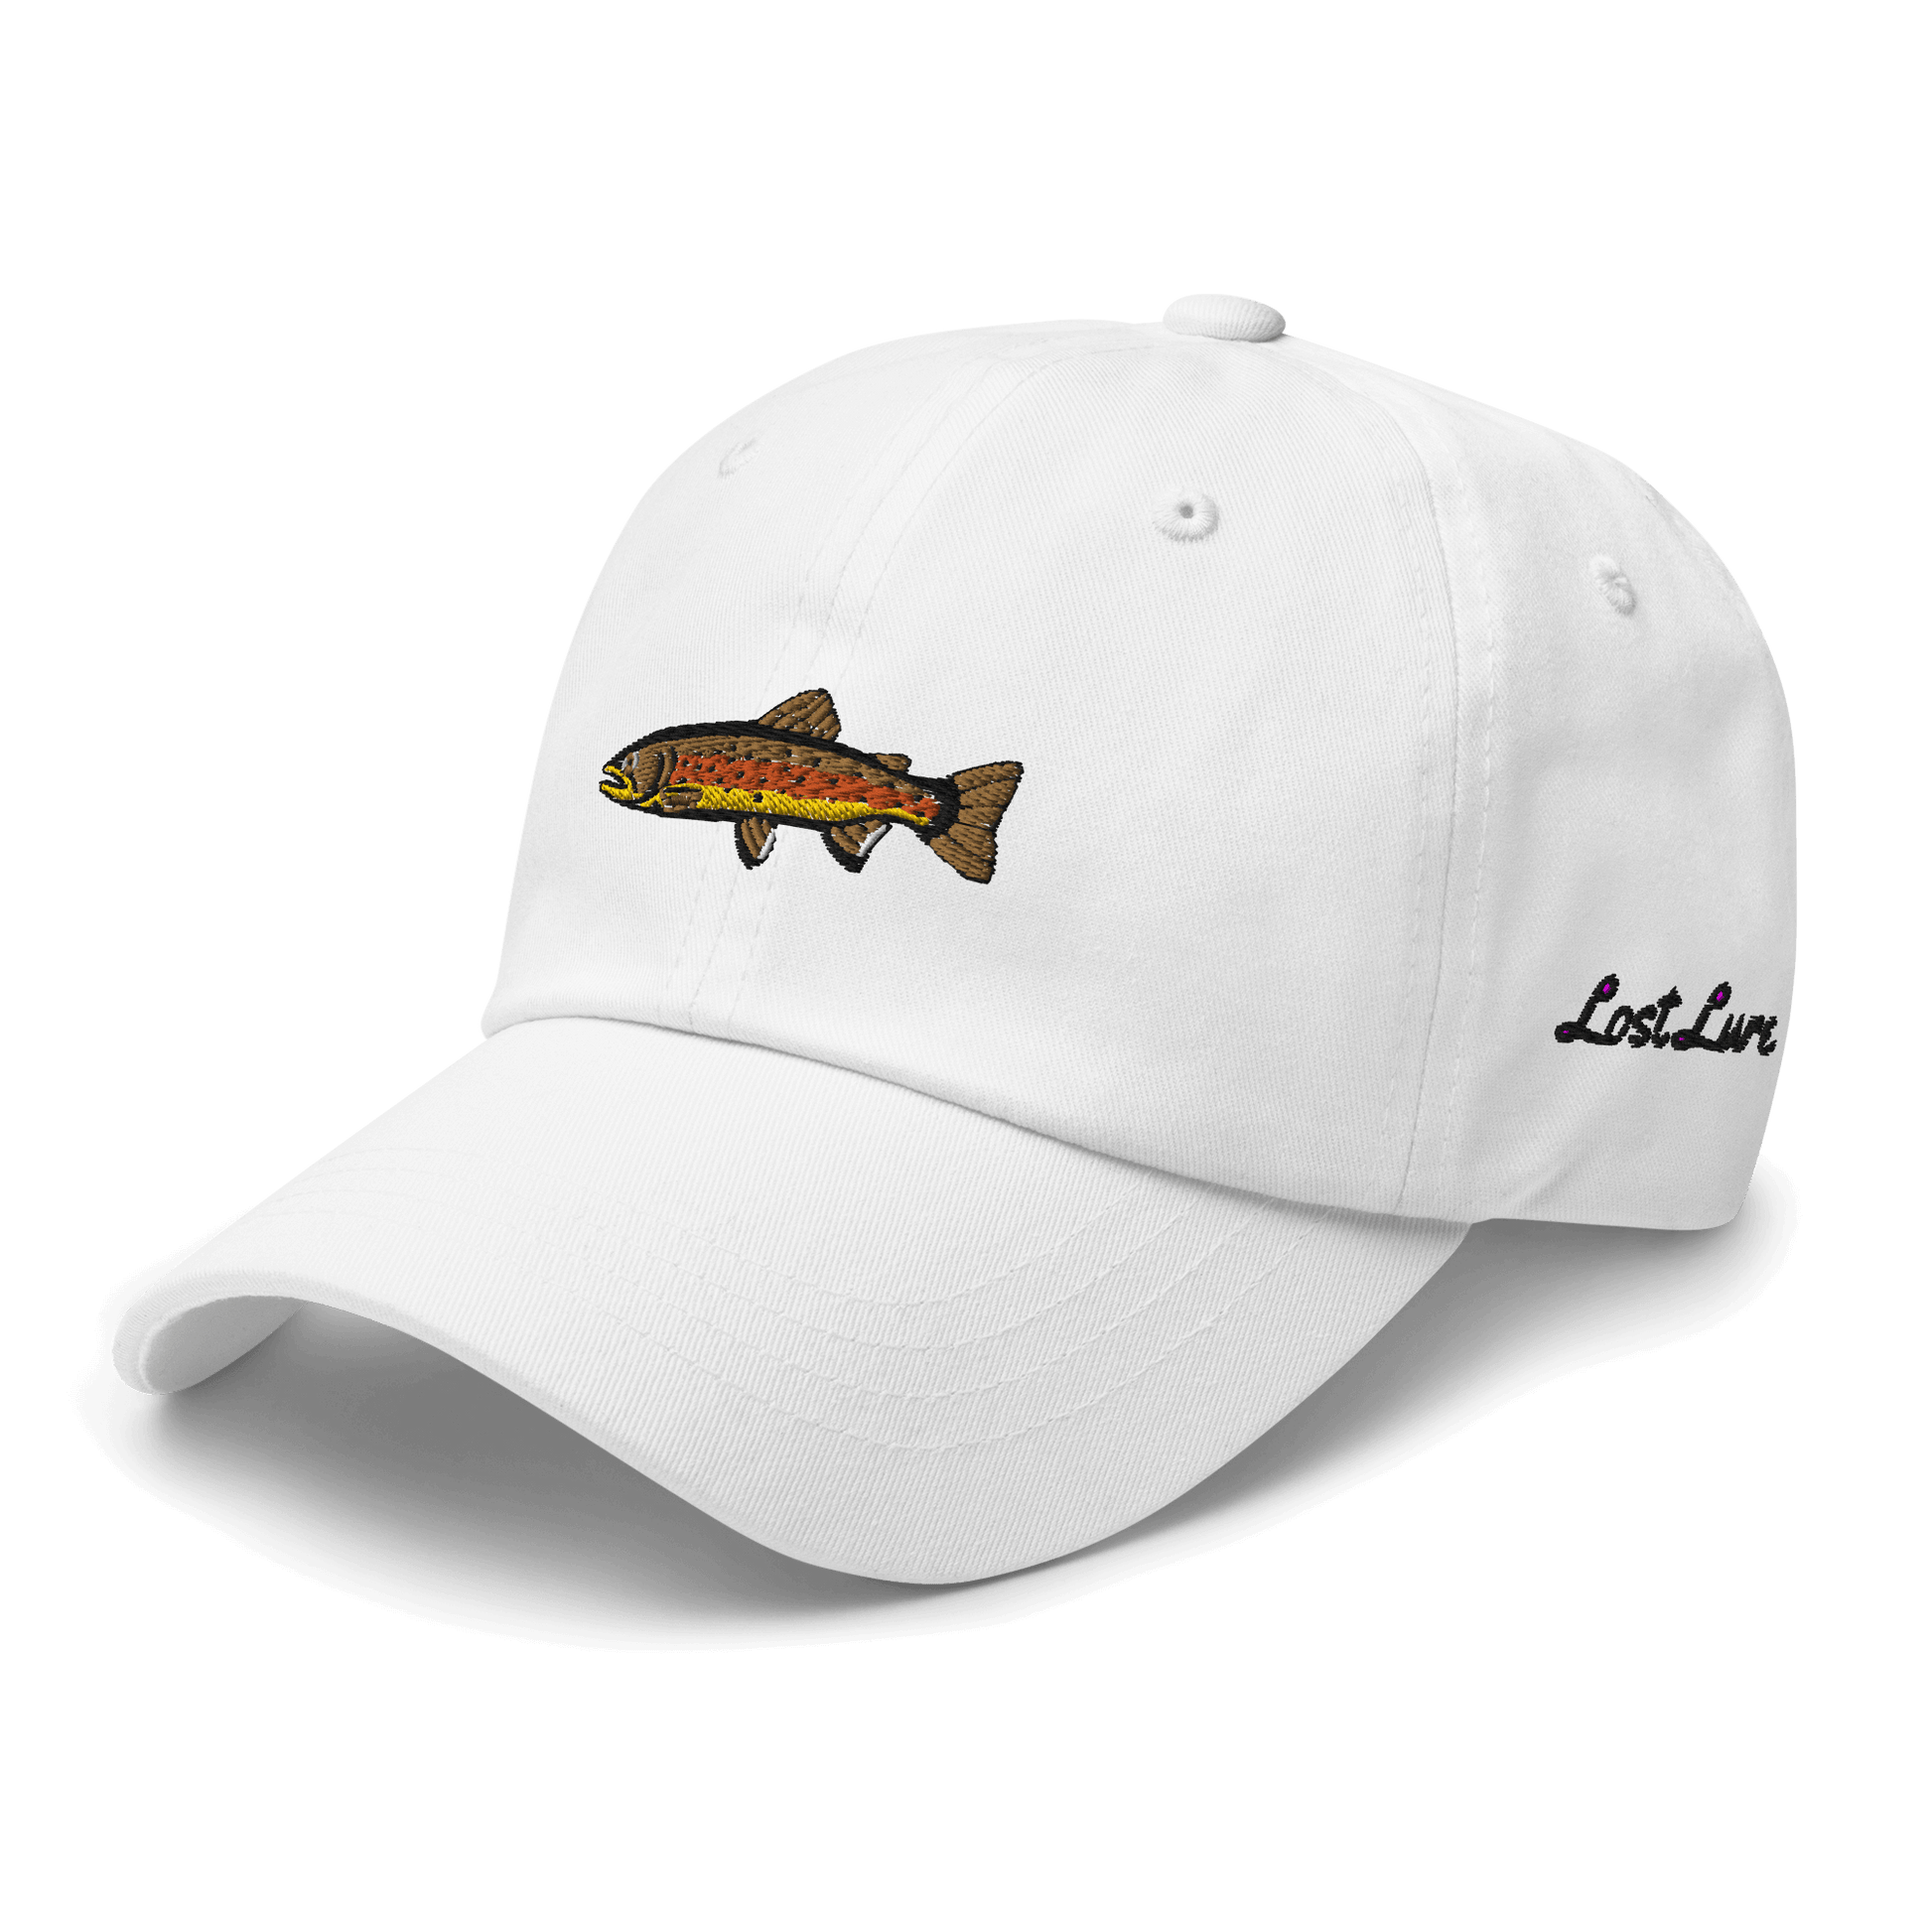 Brown Trout fishing hat. It’s a simple embroidered hat/ dad hat with a brown trout and the lost lure logo on the side. White hat, front left side